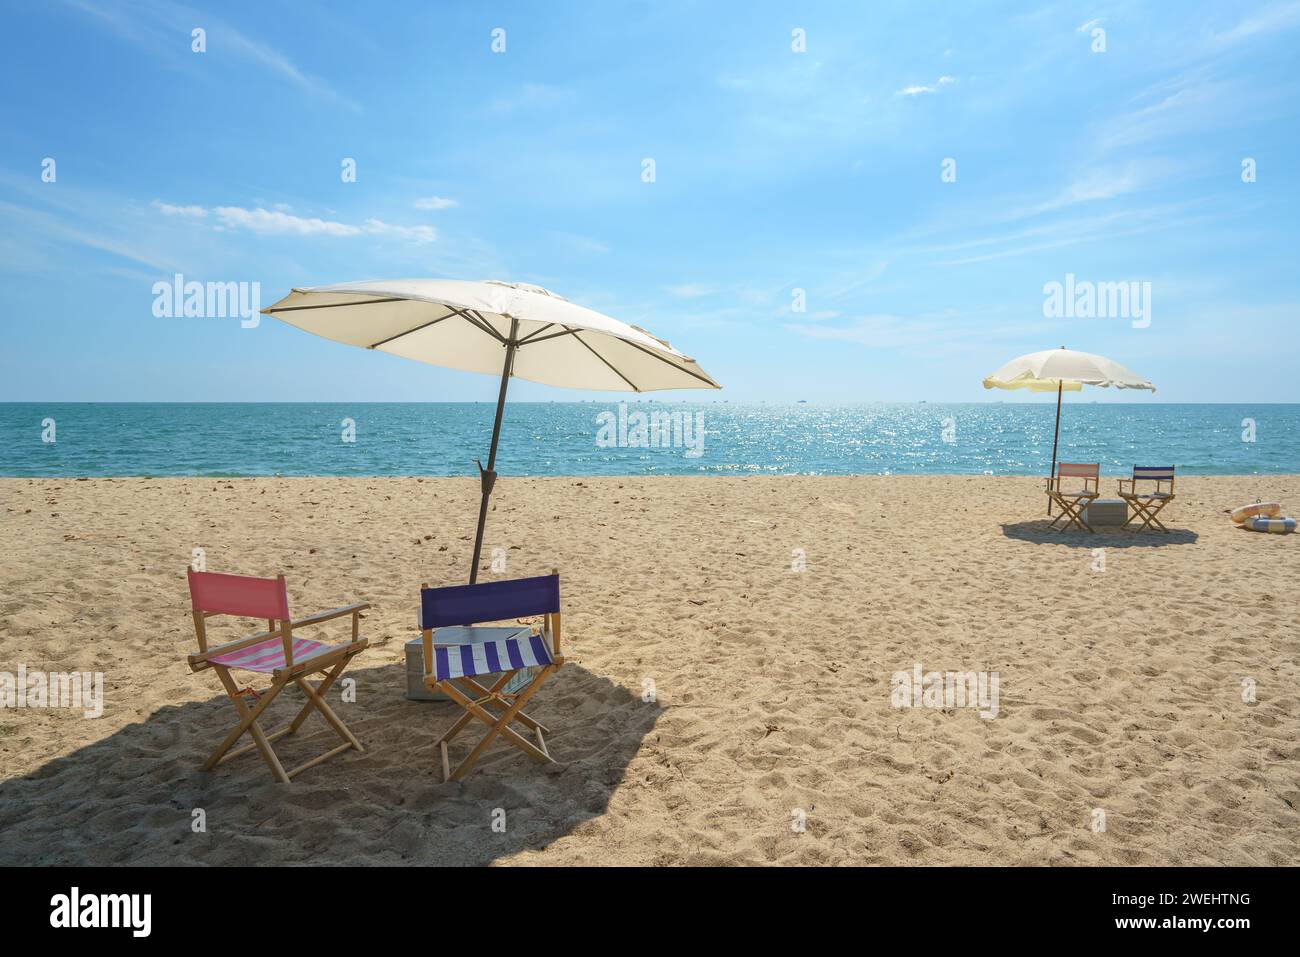 Chair and umbrella perfectly placed on a serene beach invites relaxation, capturing the essence of seaside serenity and the promise of a peaceful esca Stock Photo